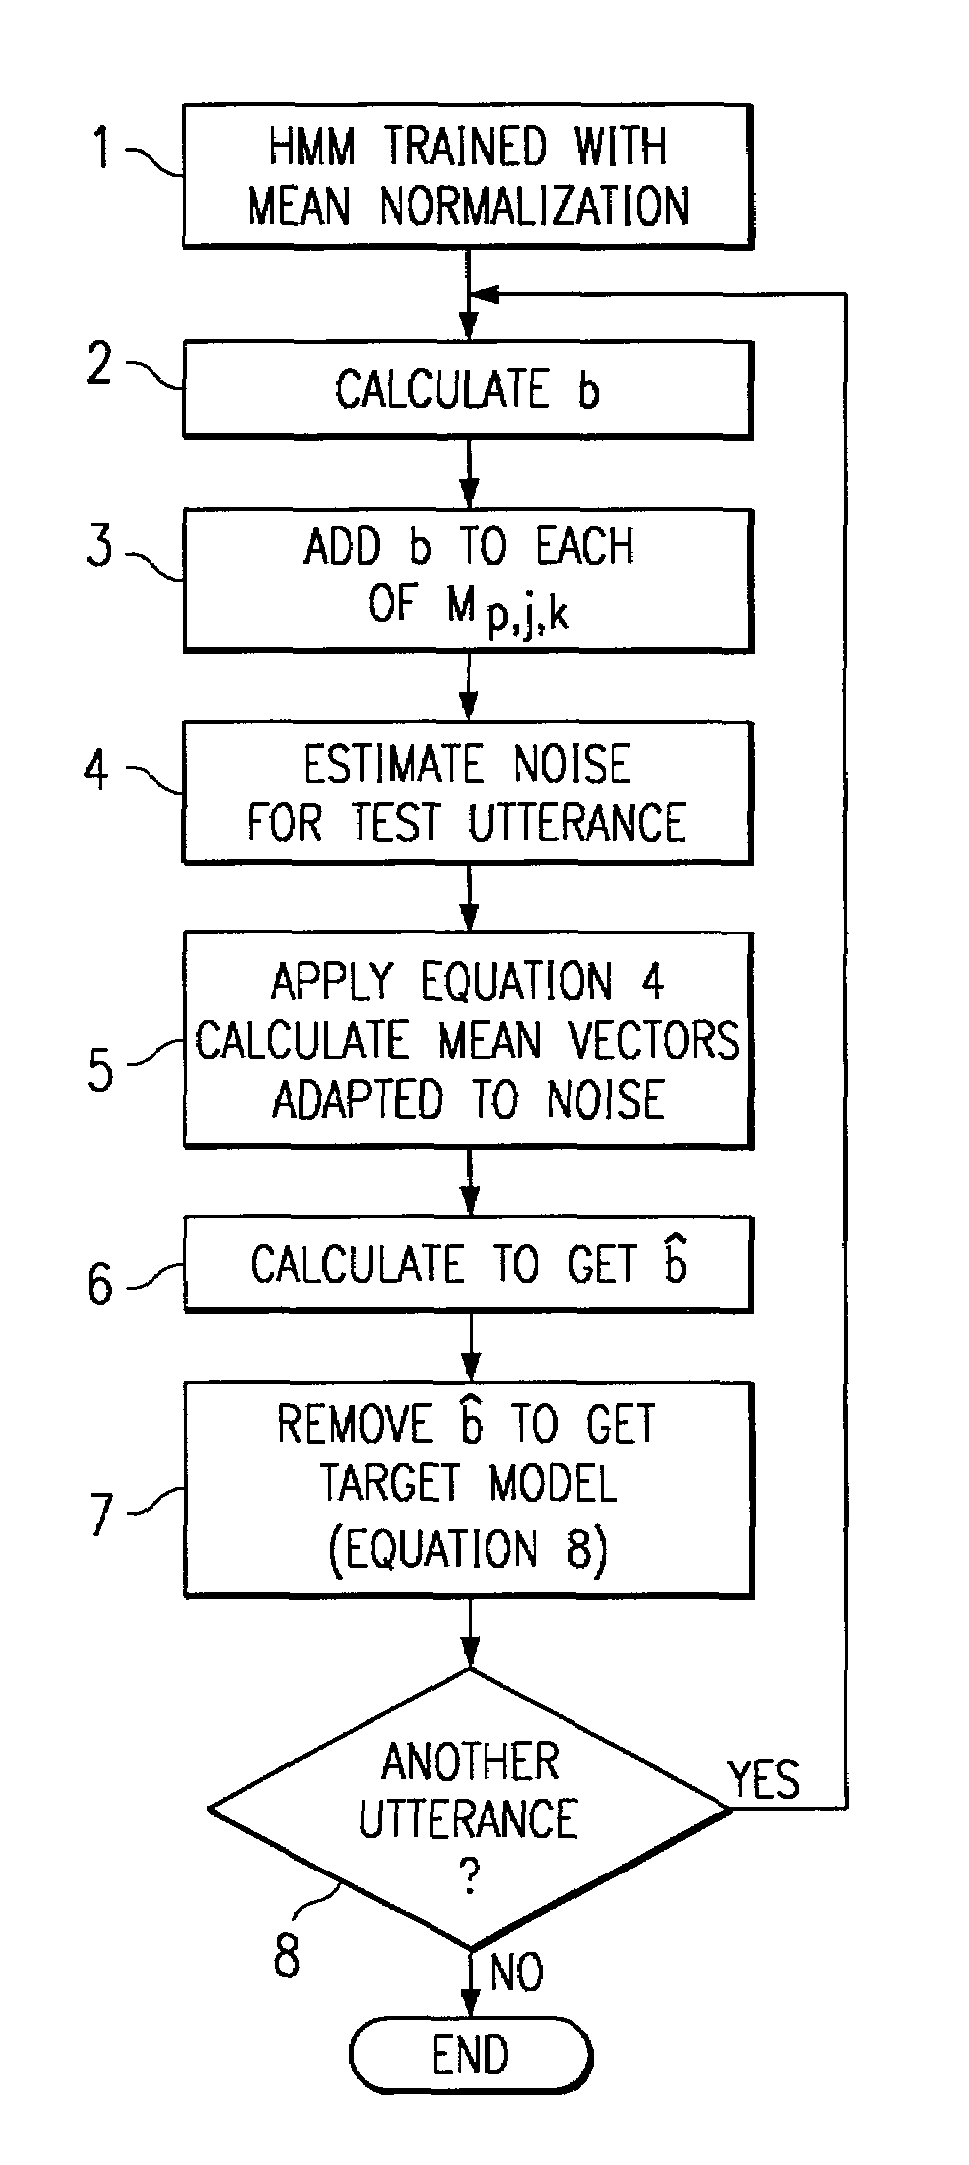 Method of speech recognition with compensation for both channel distortion and background noise